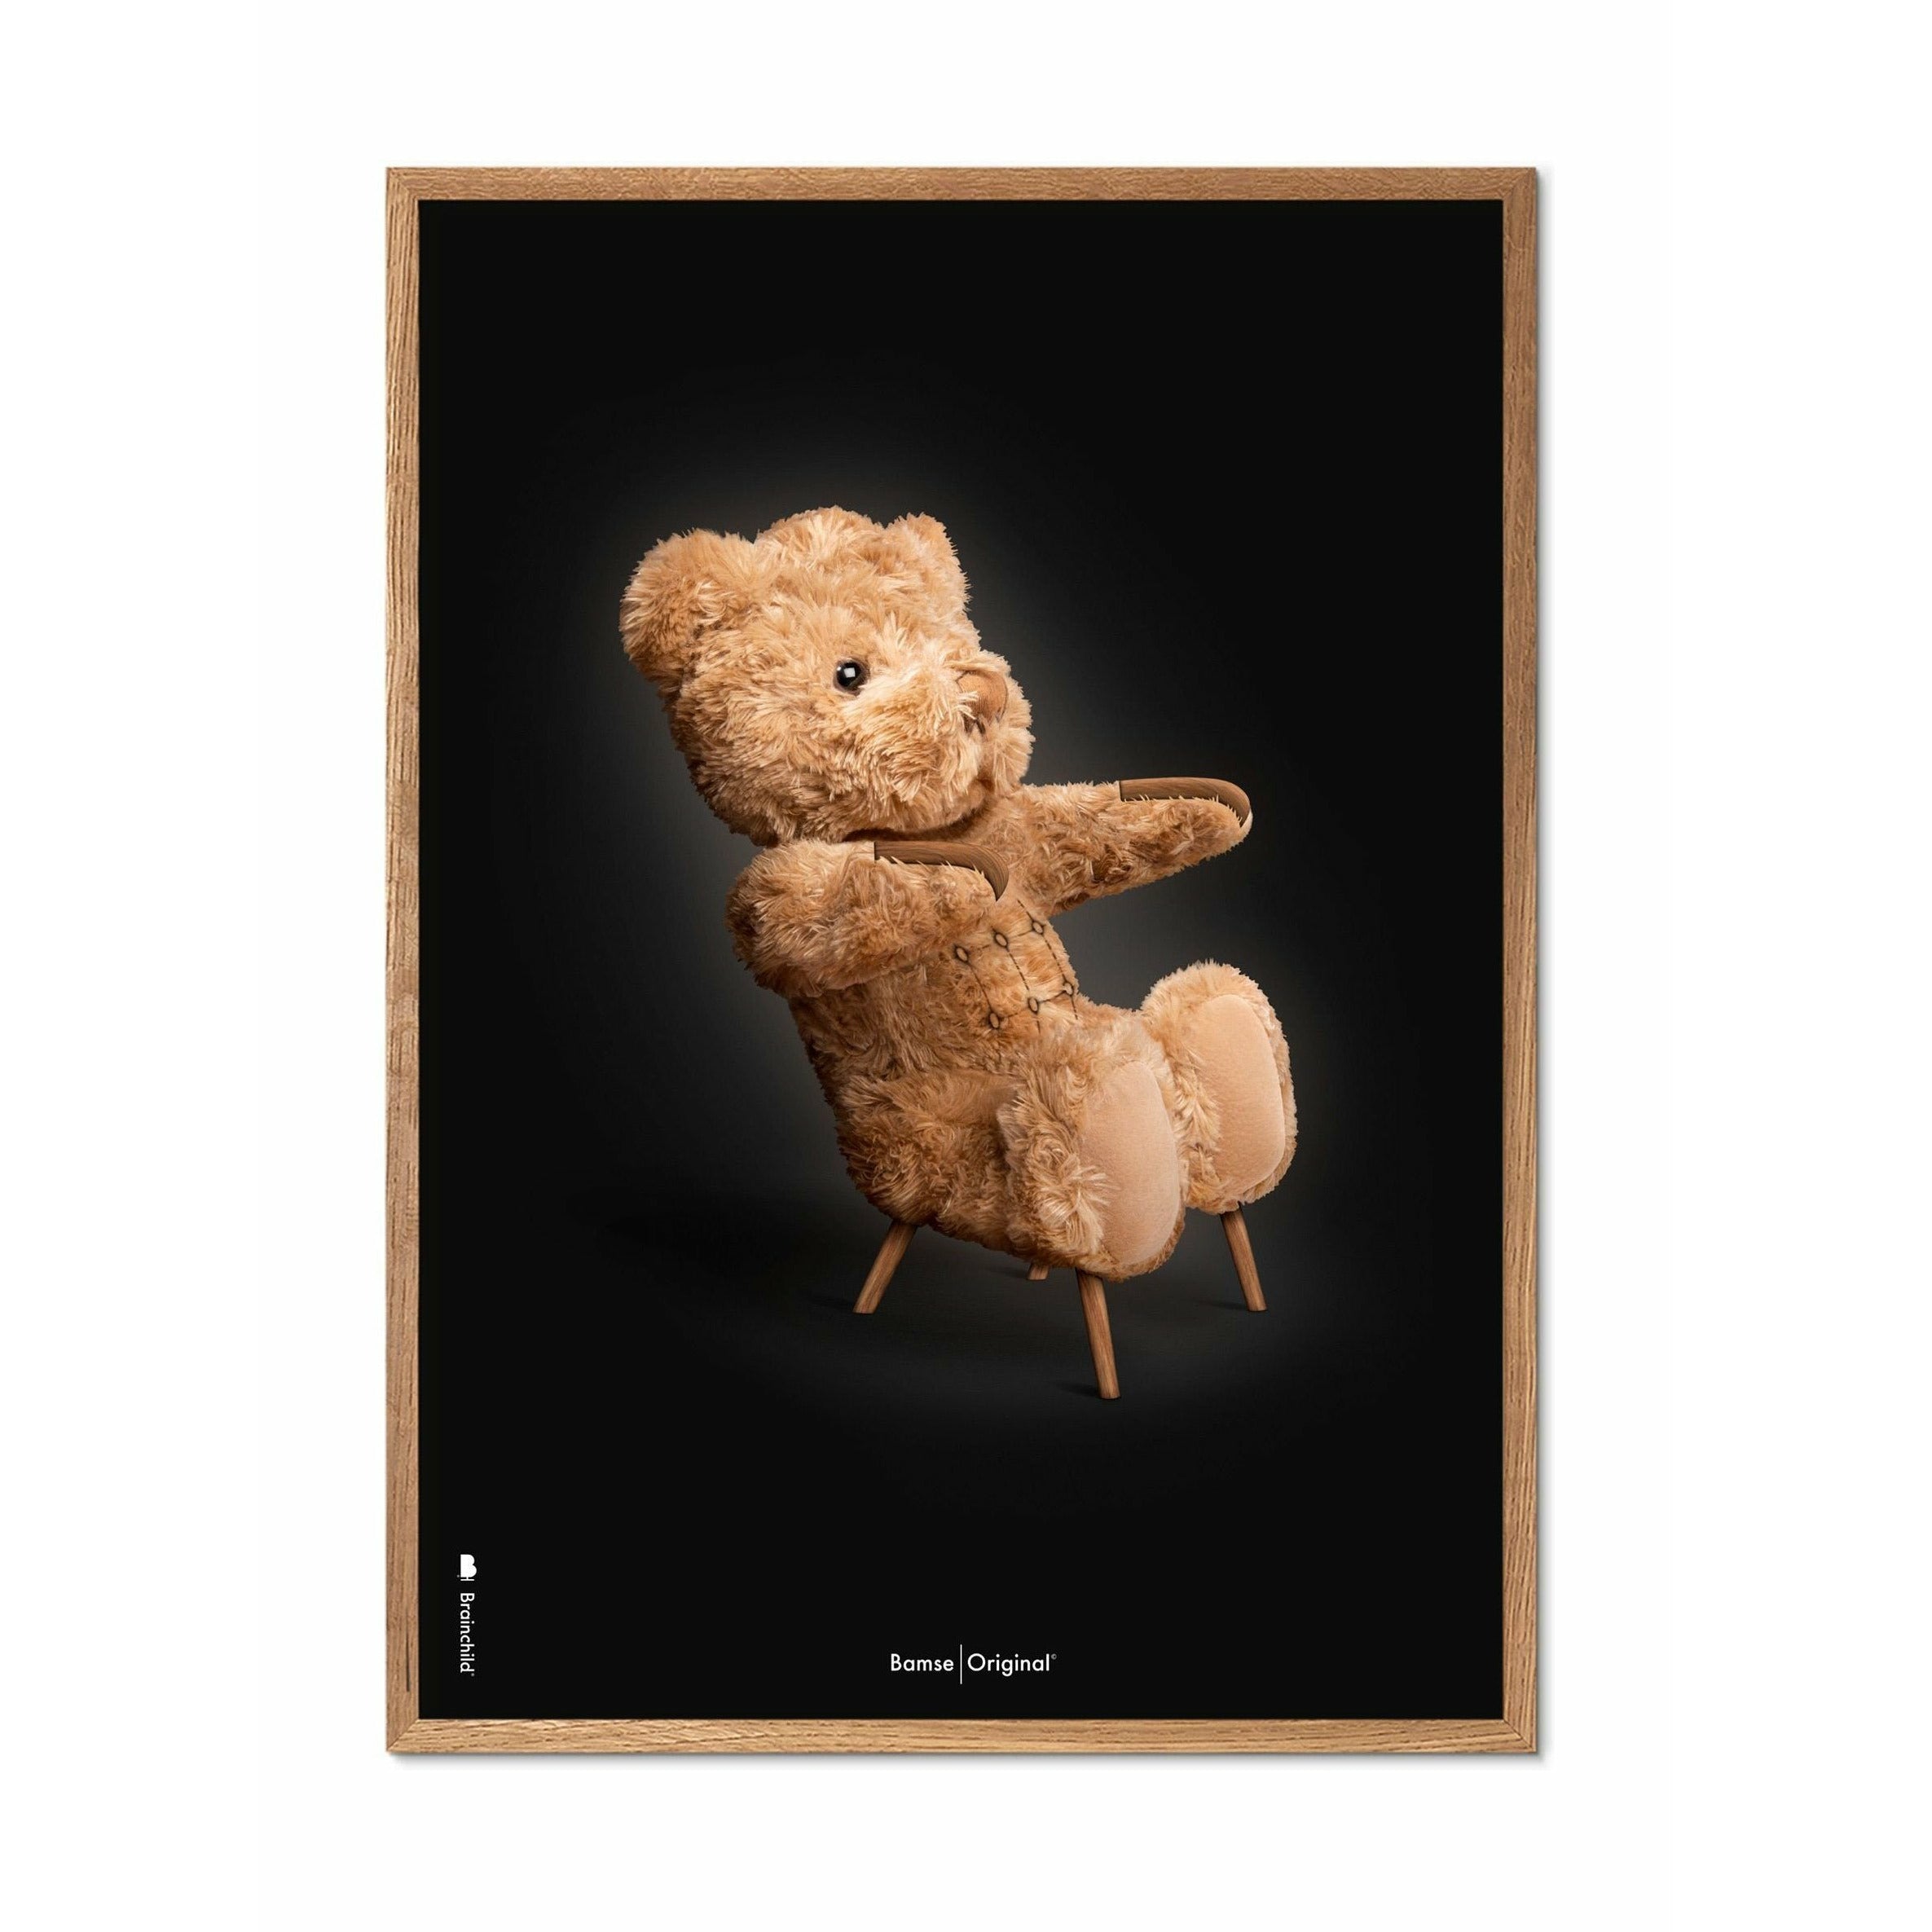 Brainchild Teddy Bear Classic Poster, Frame Made Of Light Wood A5, Black Background